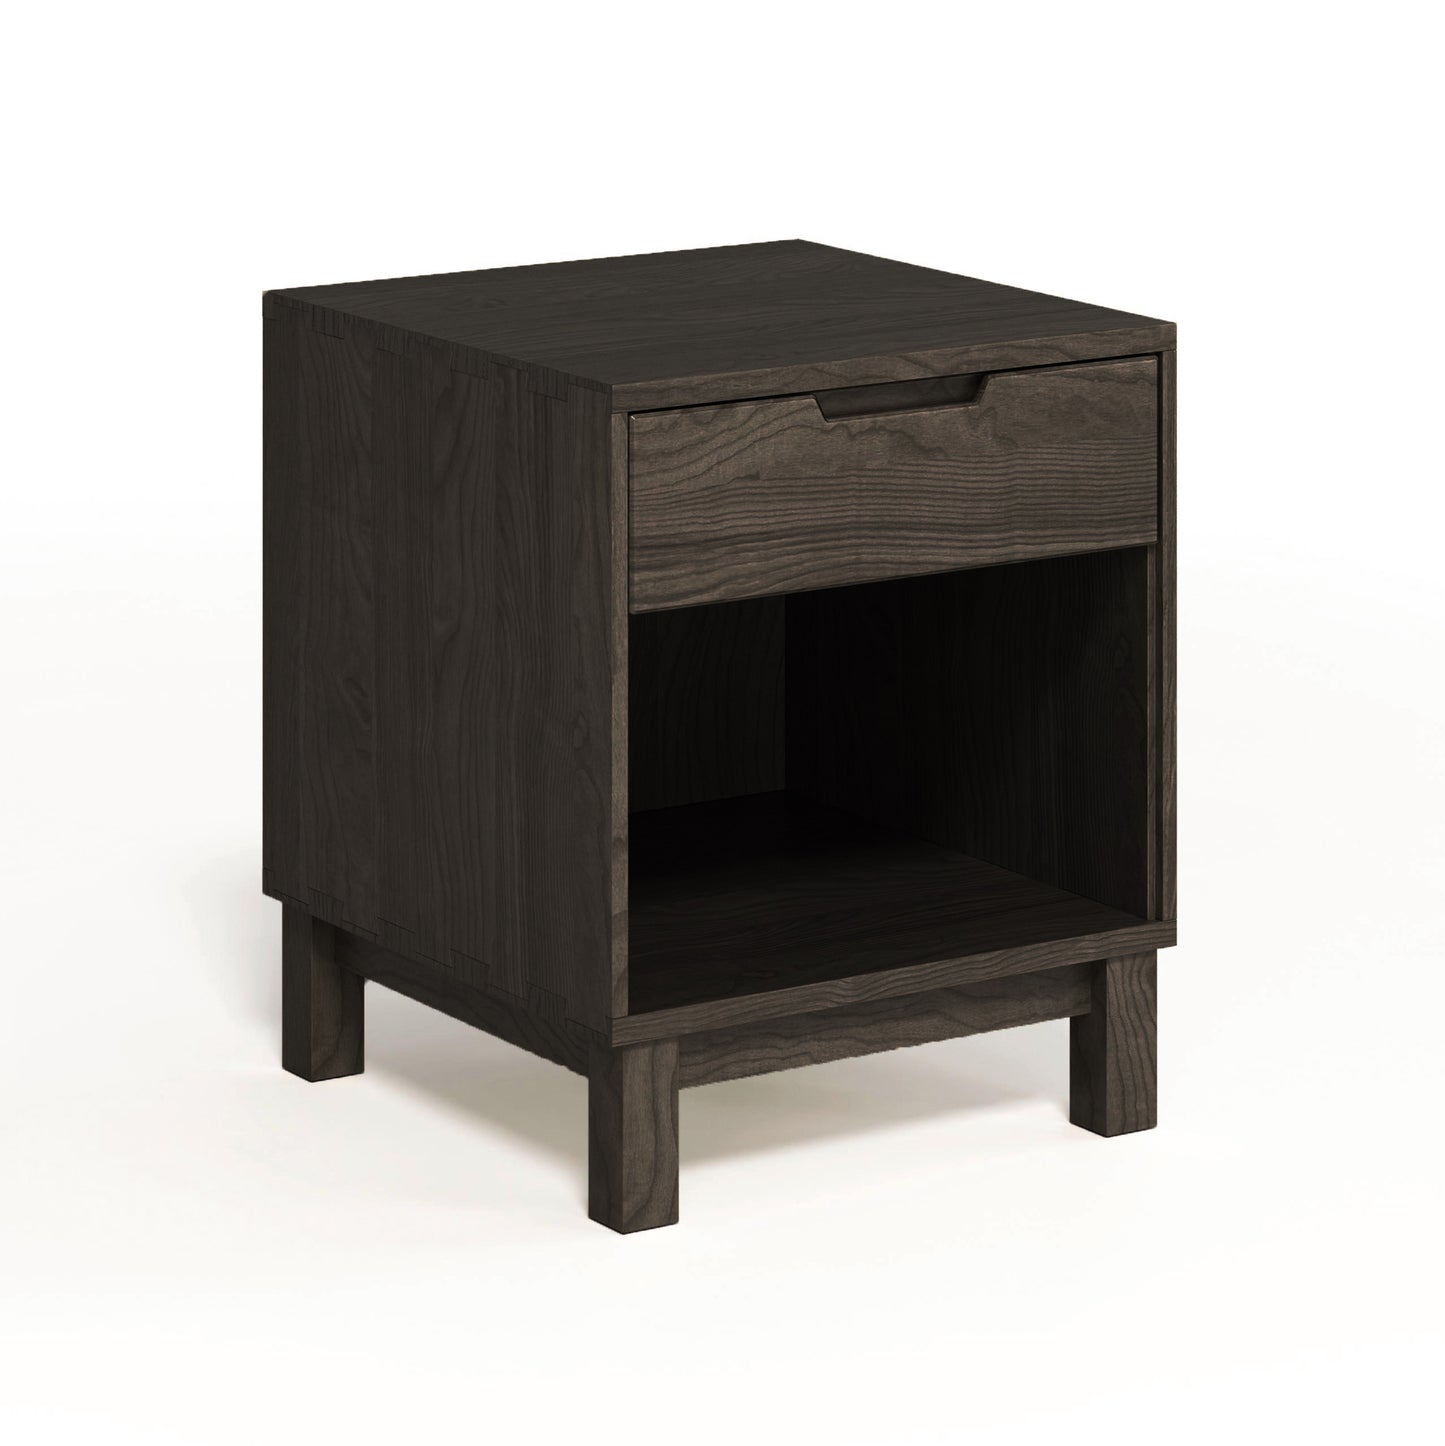 A Copeland Furniture Oslo 1-Drawer Enclosed Shelf Nightstand, featuring a solid oak hardwood and wood finish.